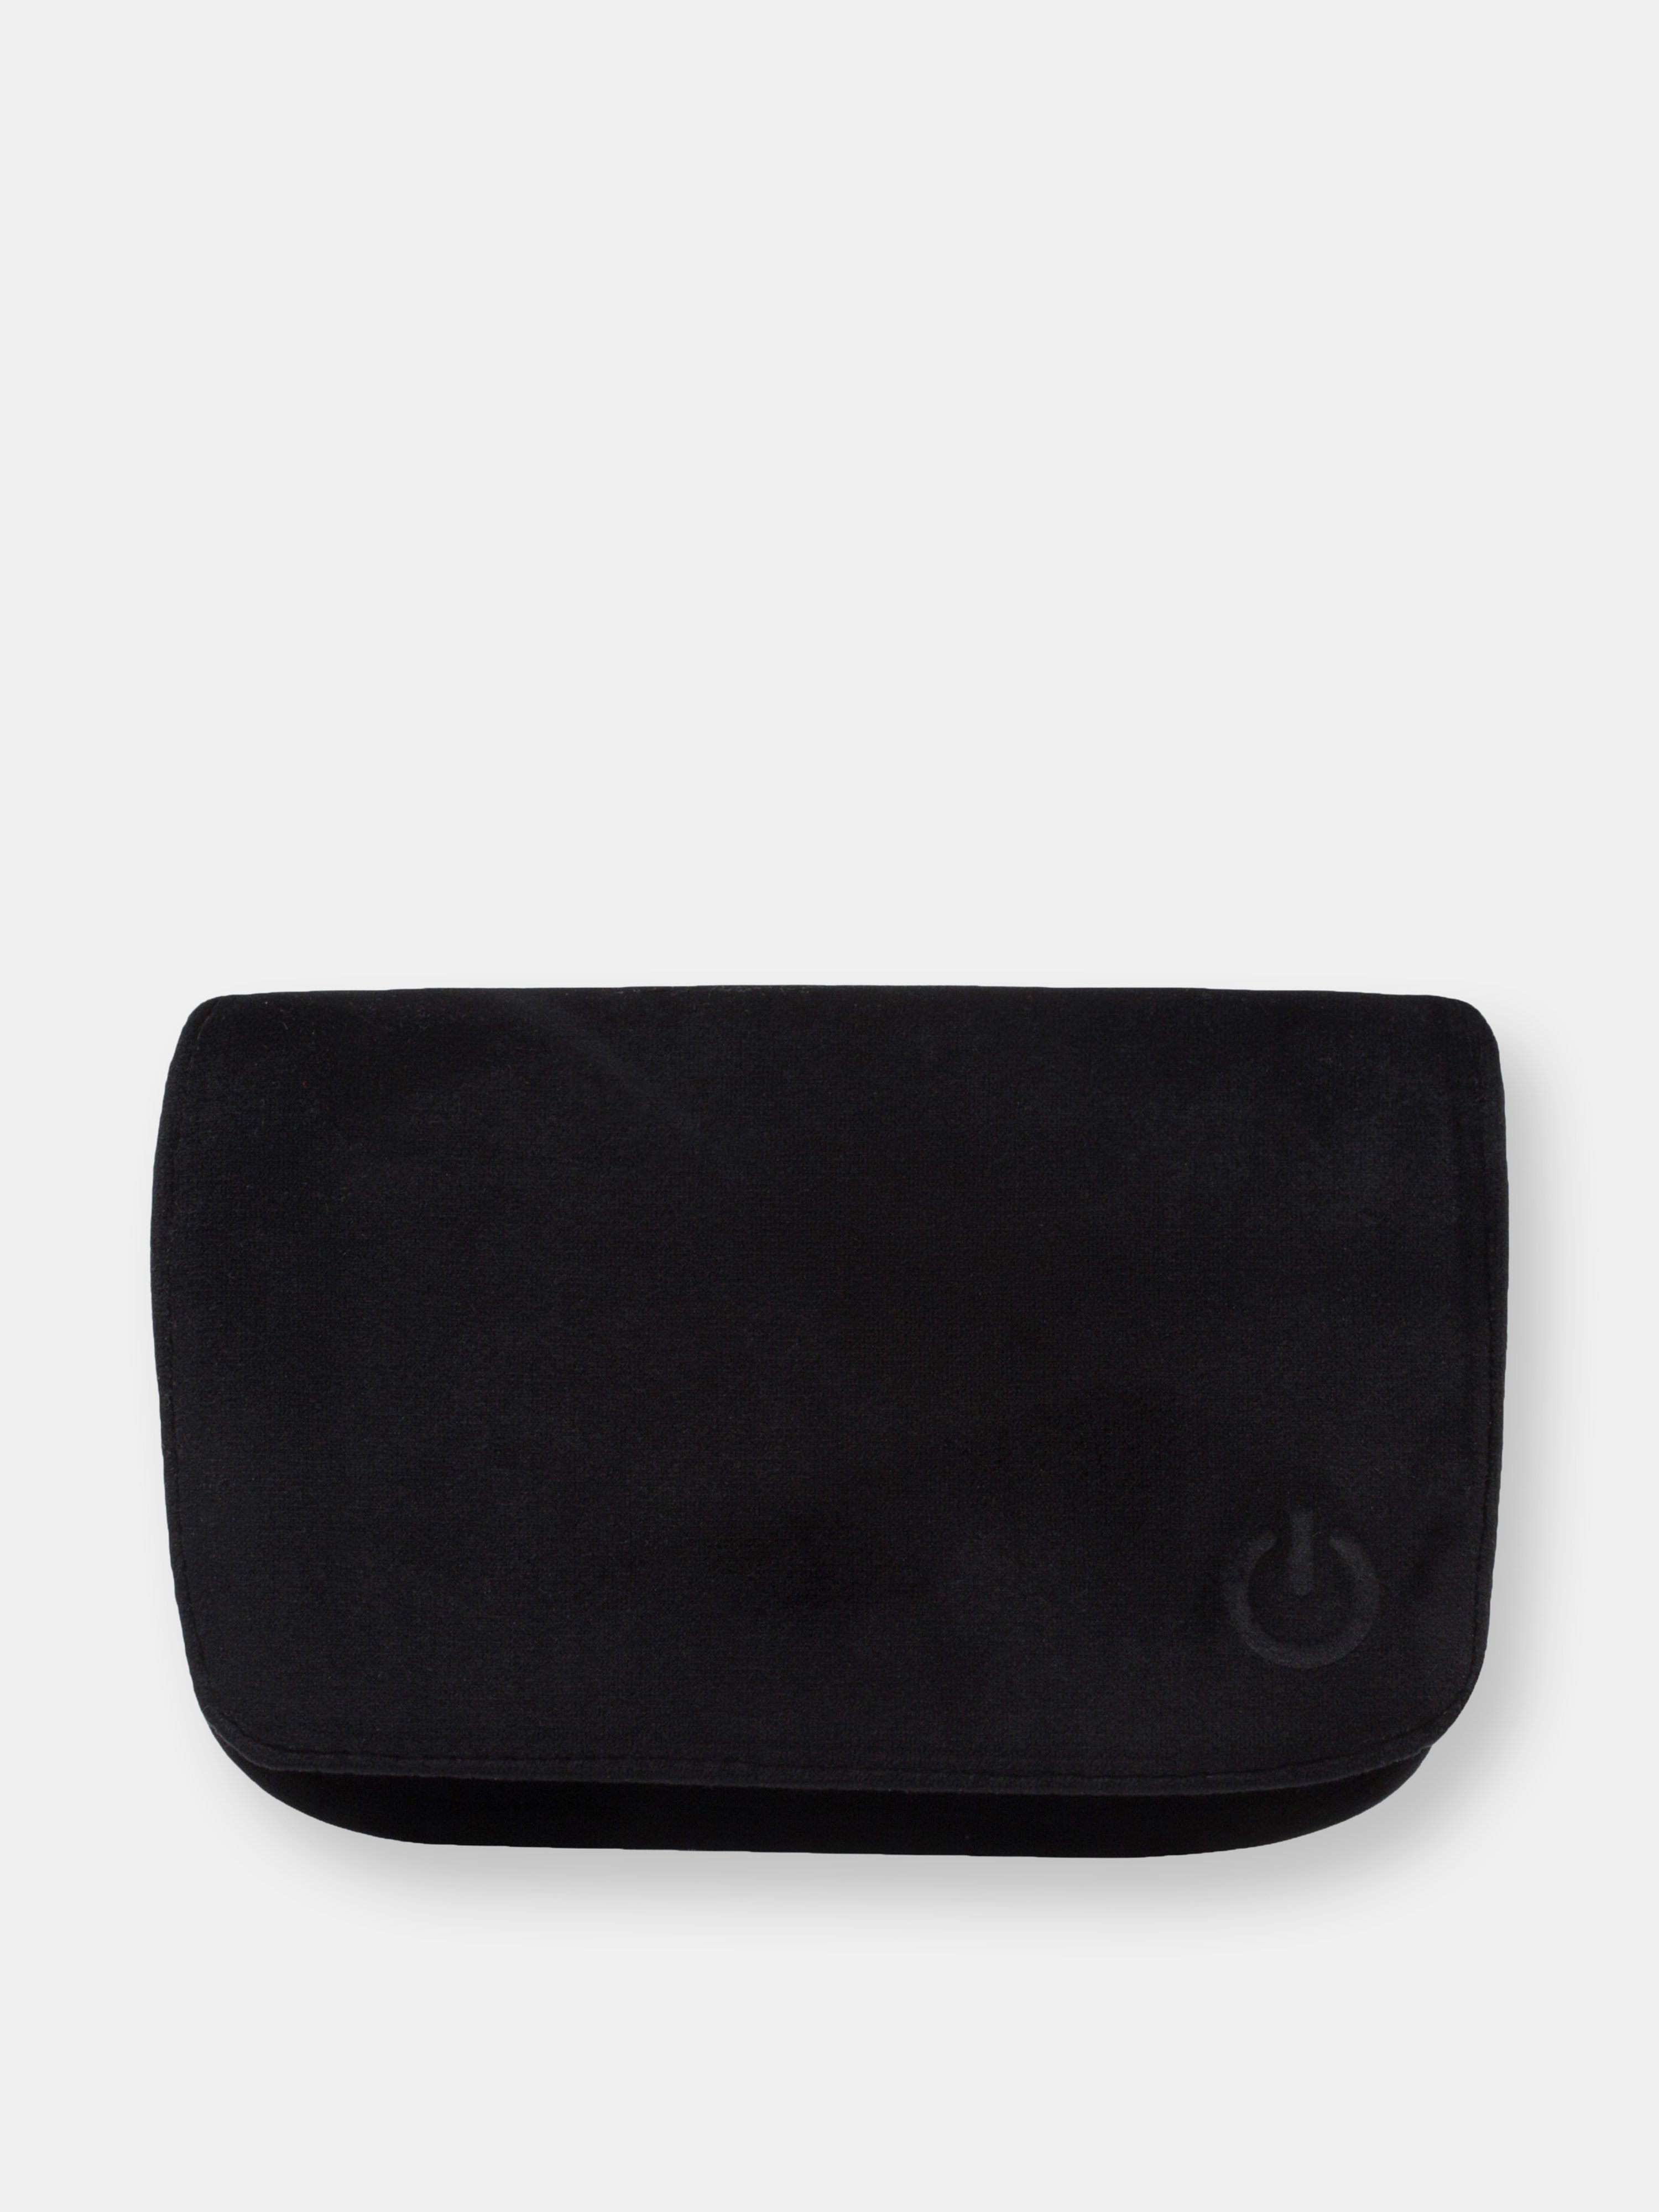 Mytagalongs Charger Case In Black